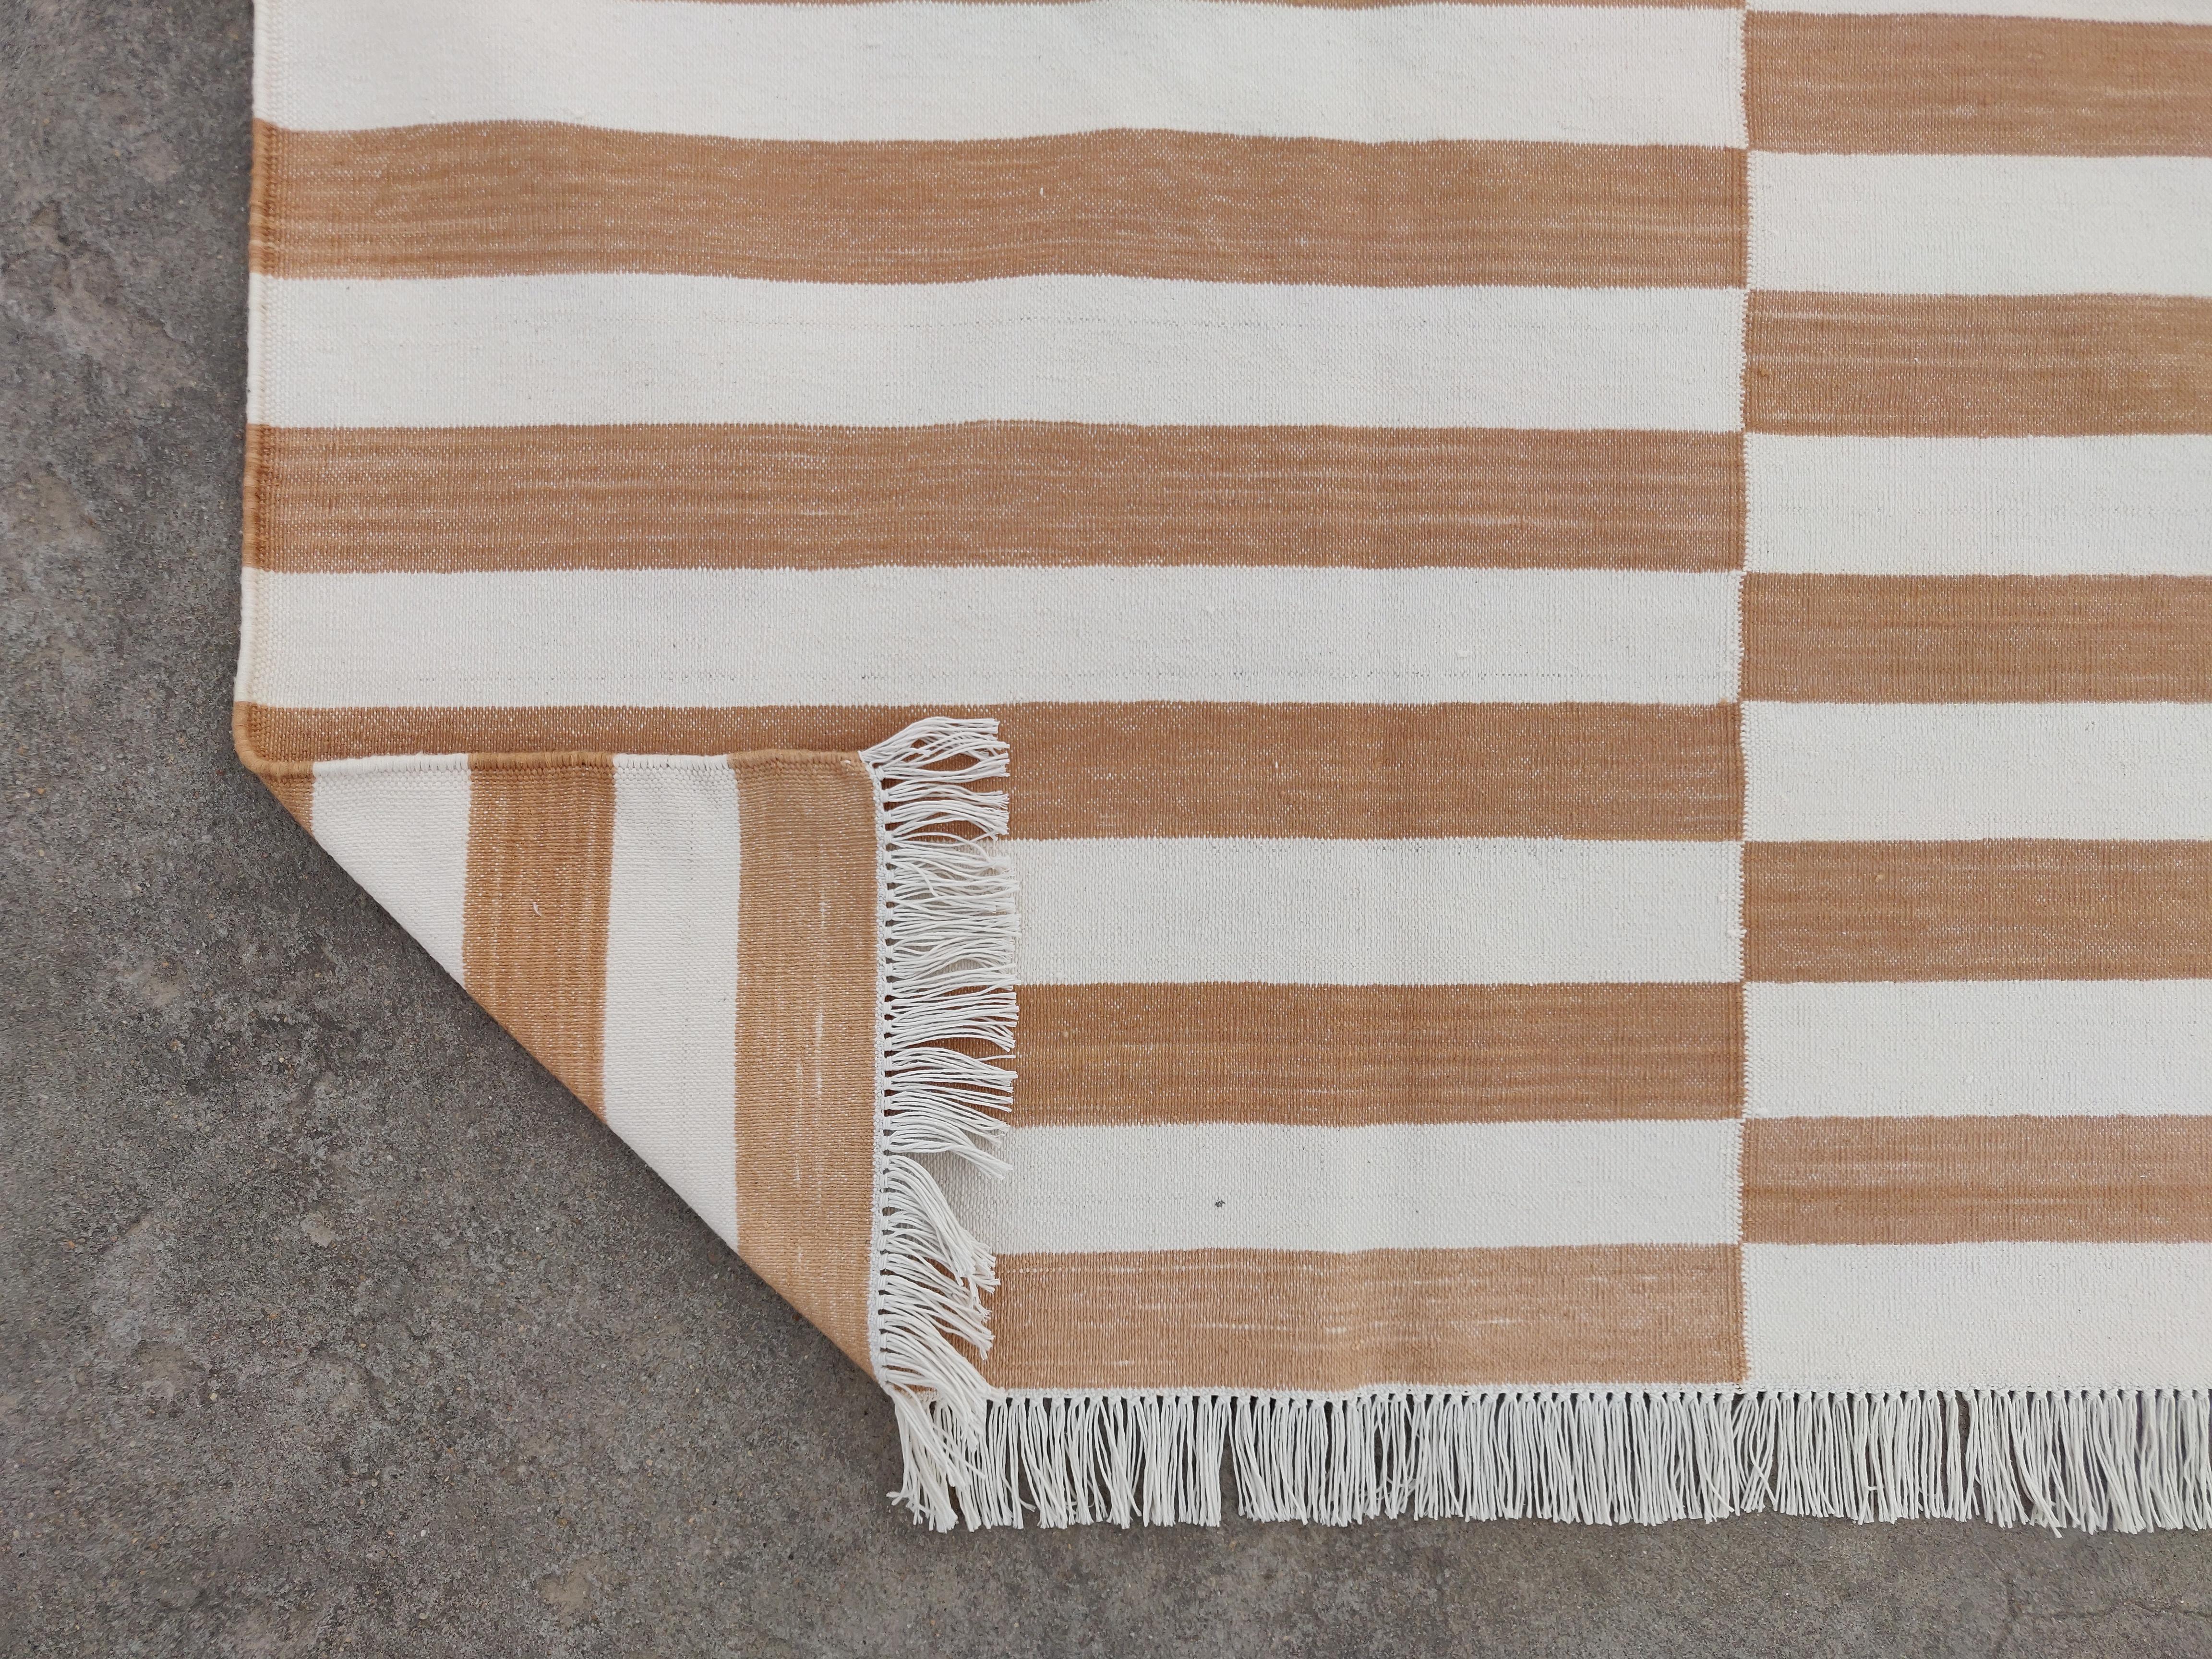 Handmade Cotton Area Flat Weave Rug, 6x9 Tan And White Striped Indian Dhurrie For Sale 2